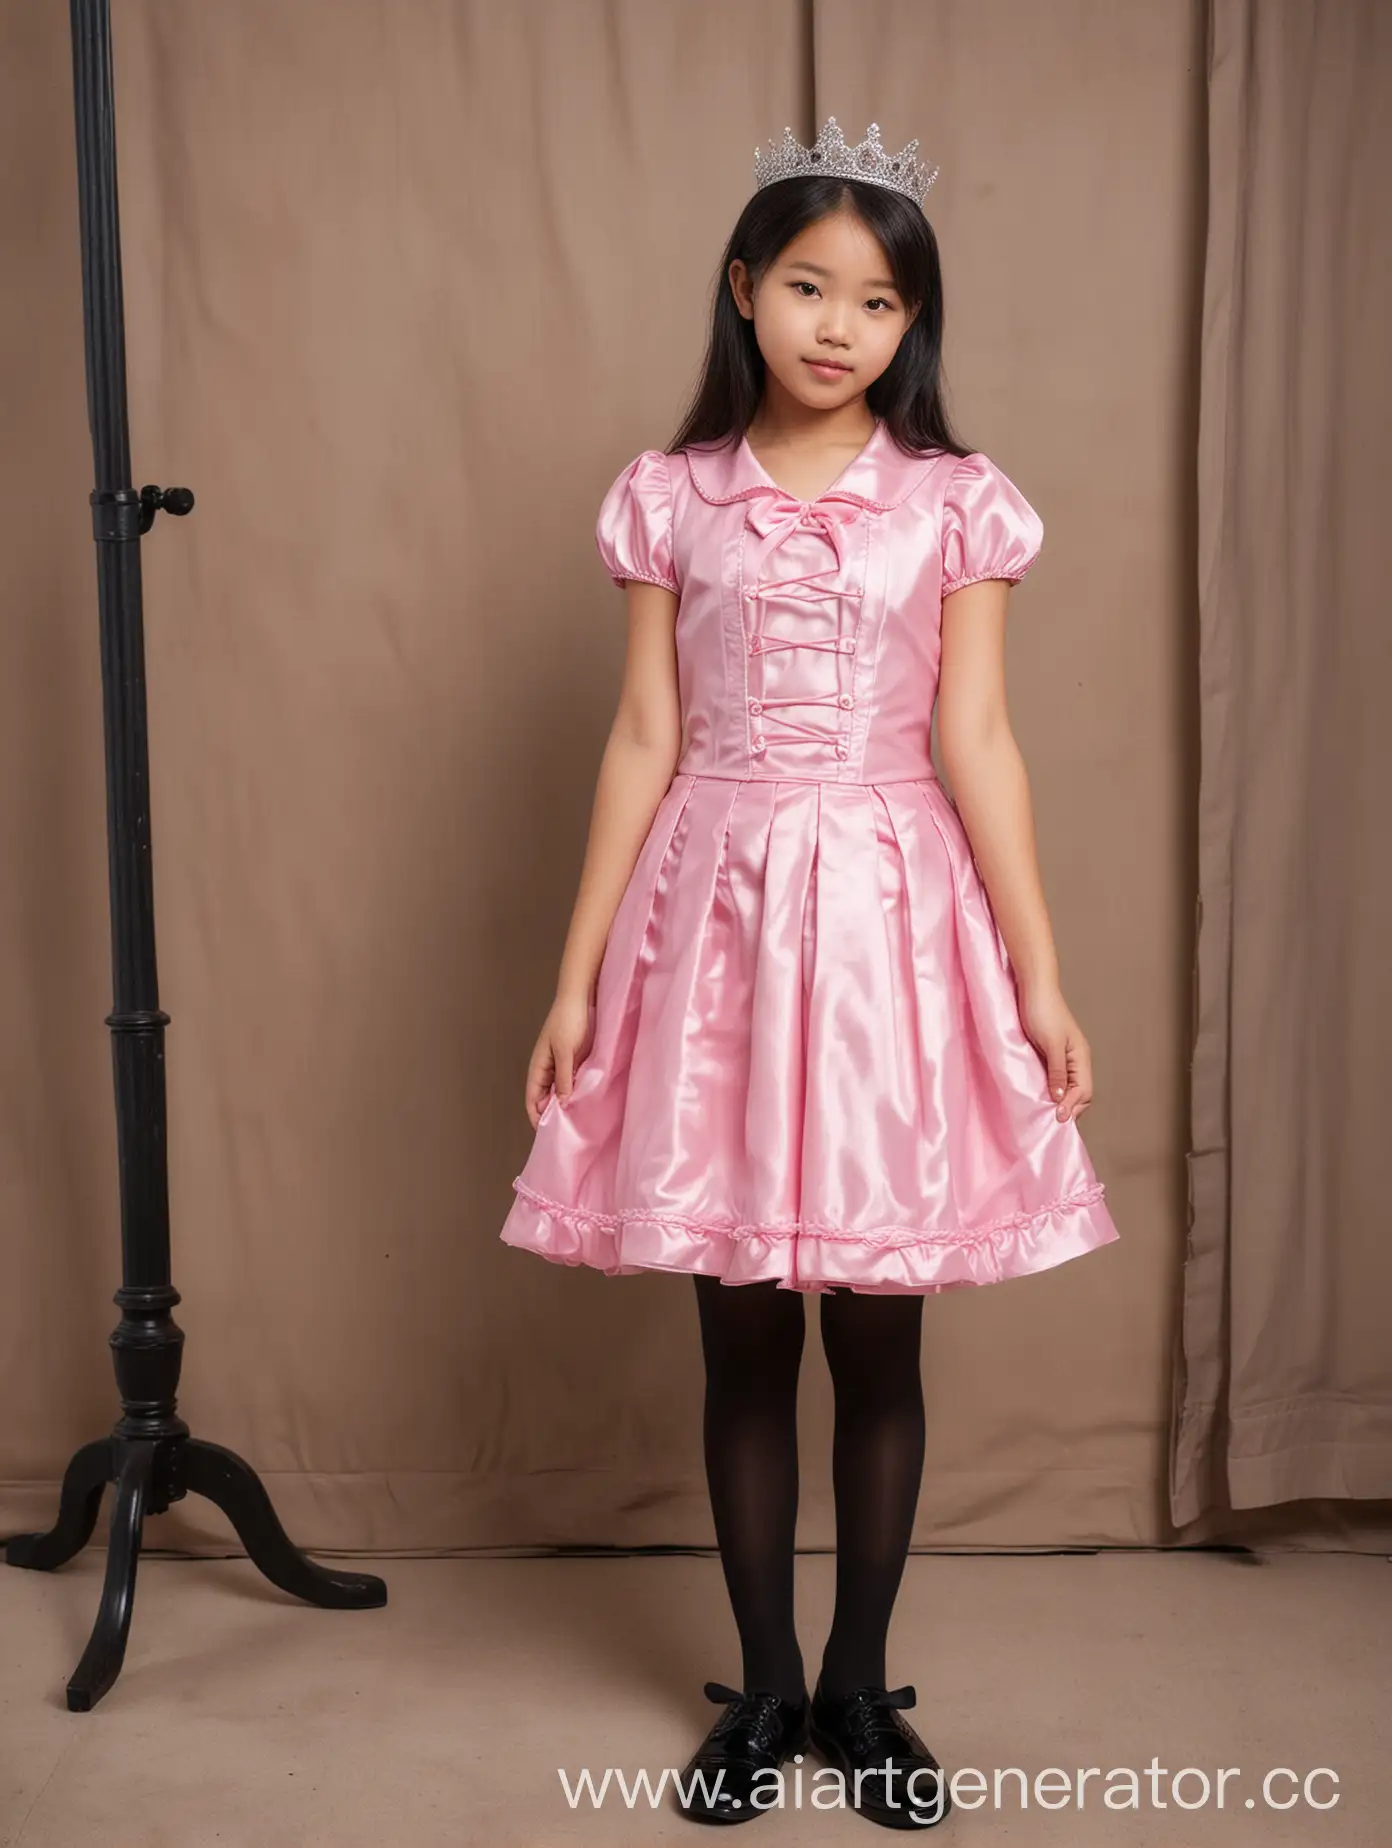 Beautiful-Asian-Middle-School-Student-in-Pink-Princess-Dress-and-Black-Stockings